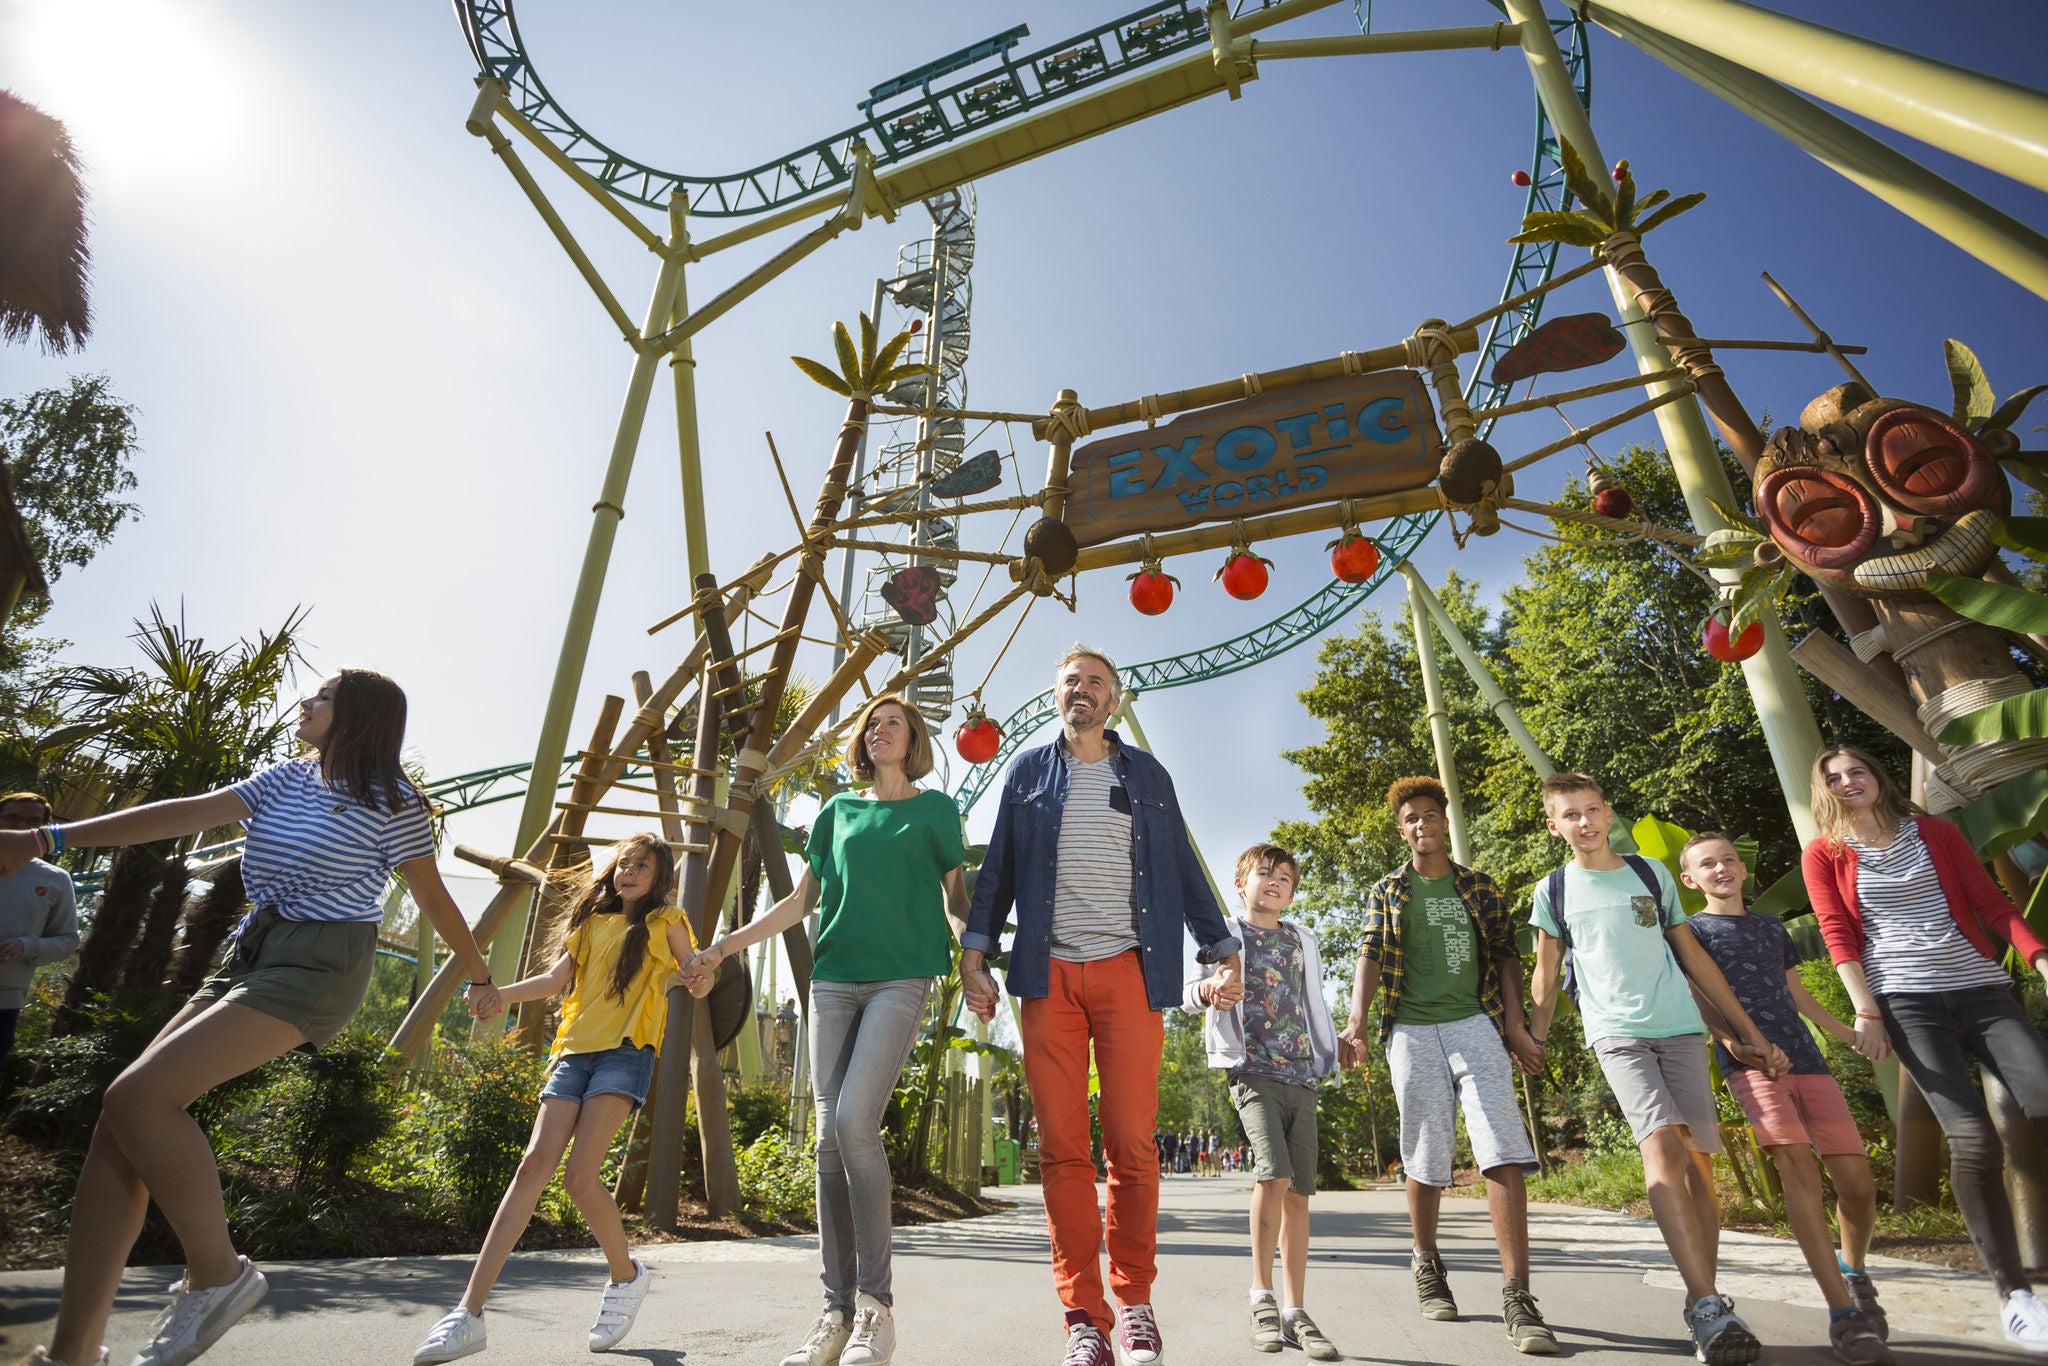 Have fun at Walibi Belgium with your family and/or your friends